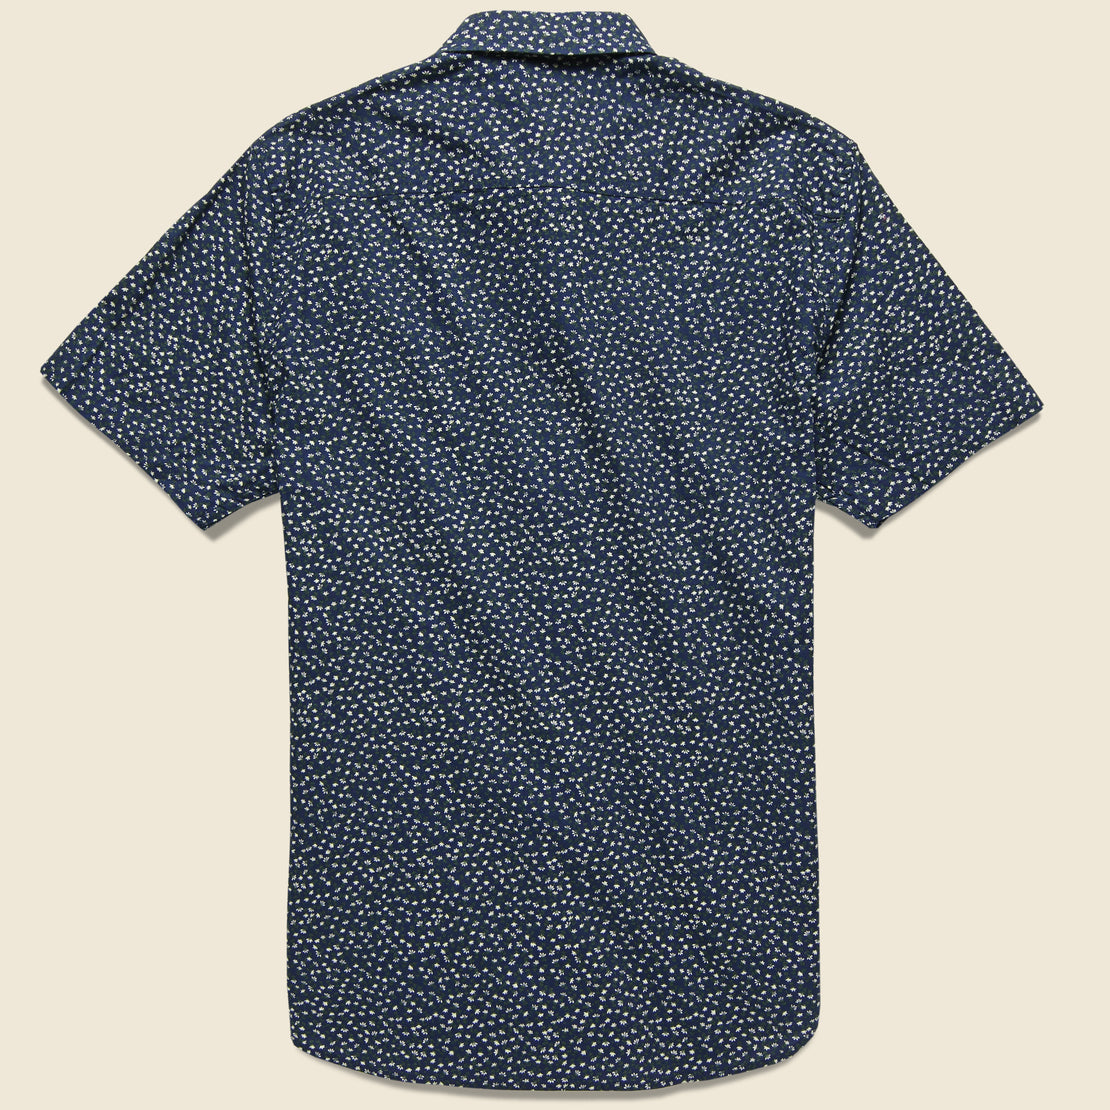 Allerton Shirt - Navy - Penfield - STAG Provisions - Tops - S/S Woven - Floral